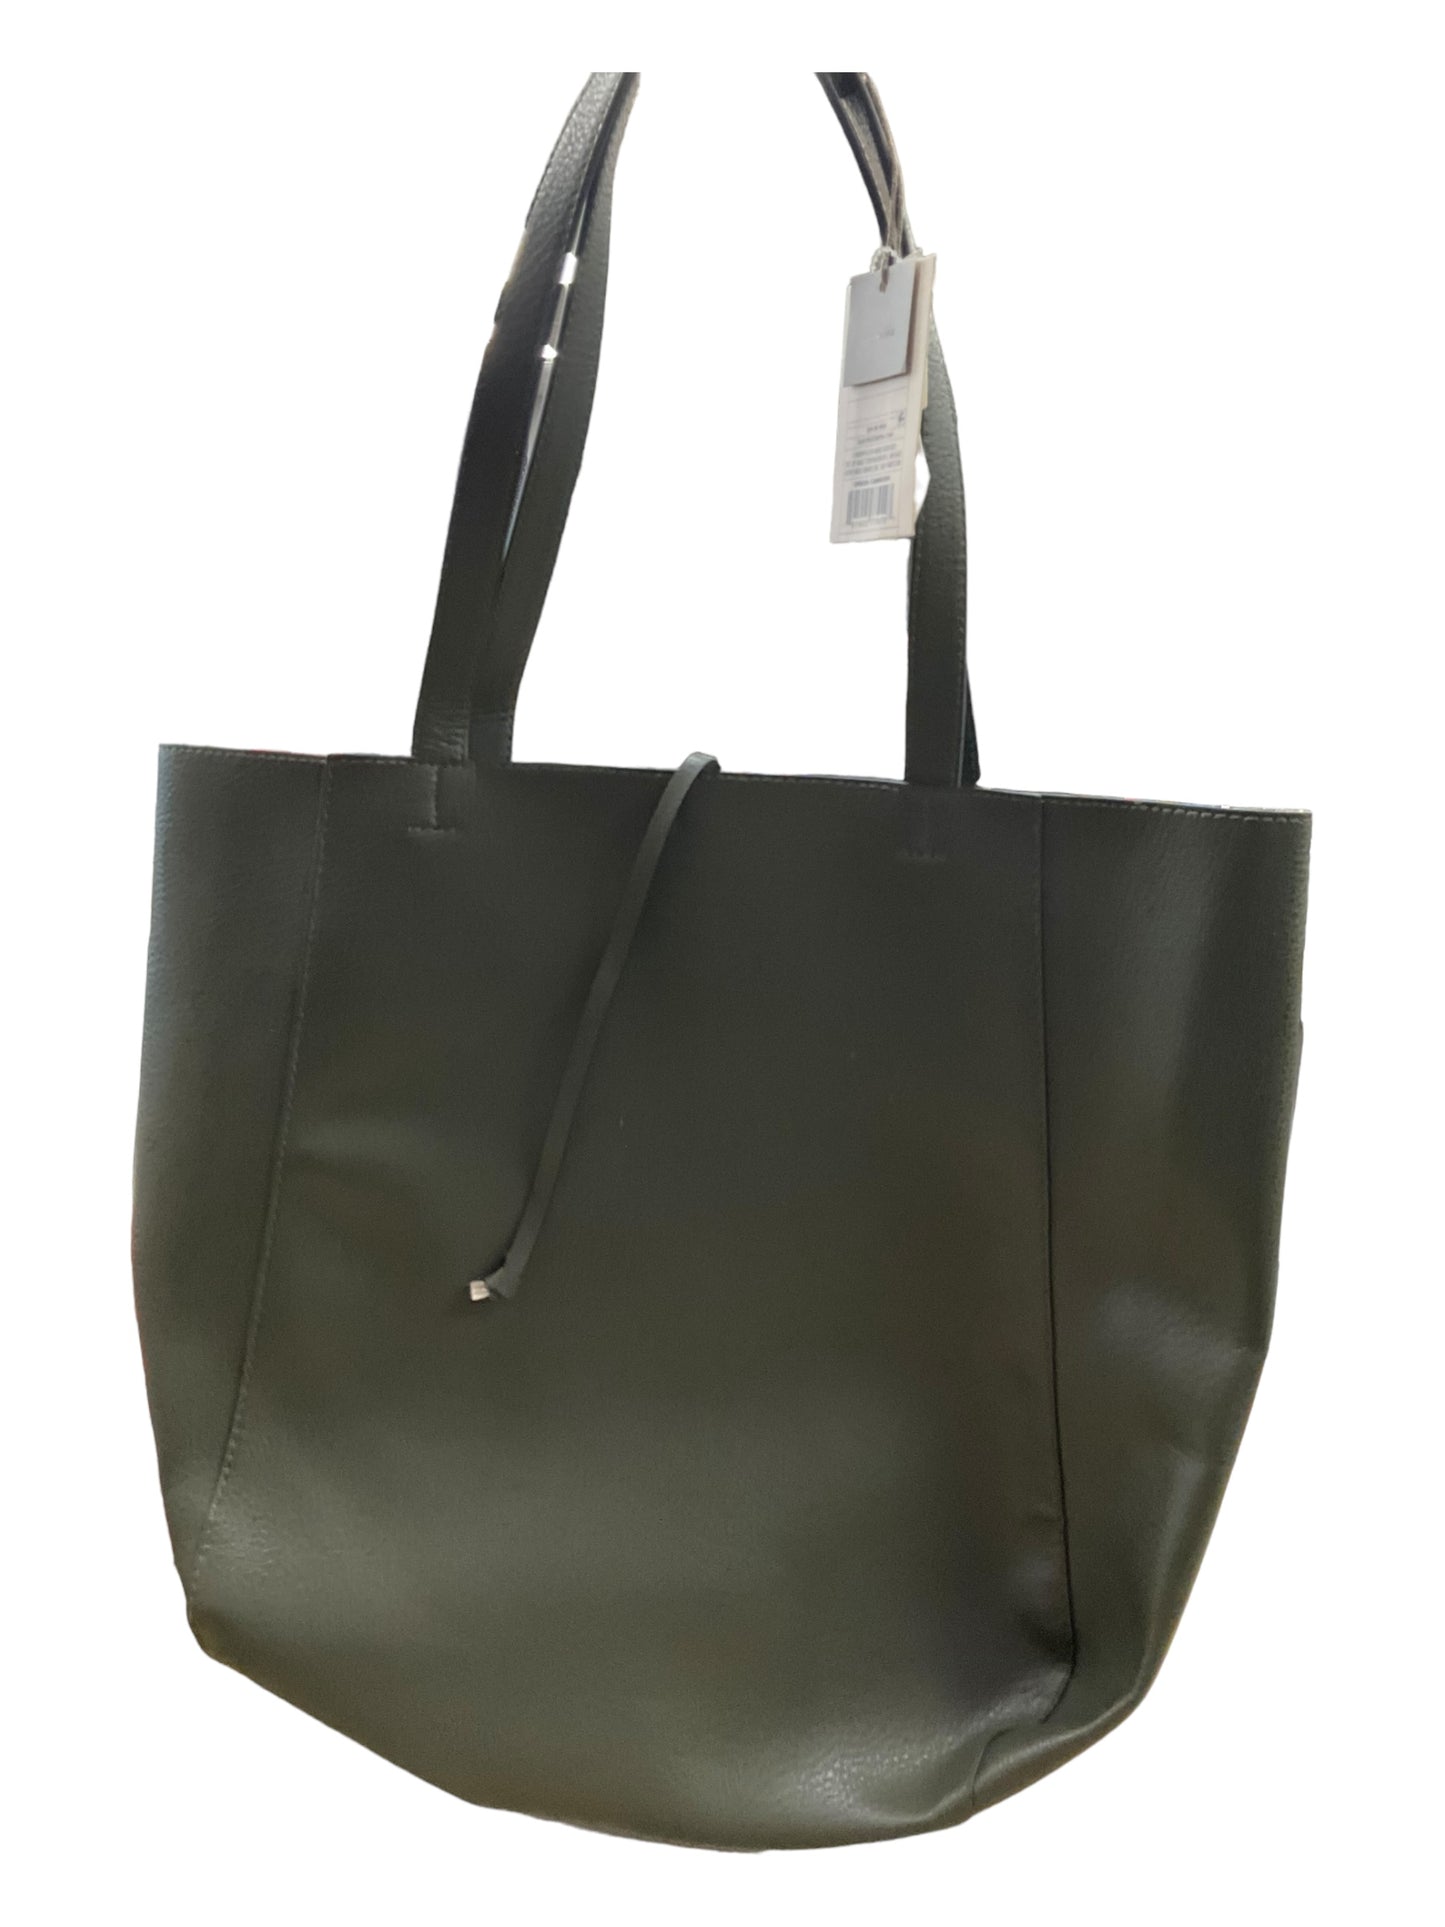 Tote By A New Day  Size: Medium